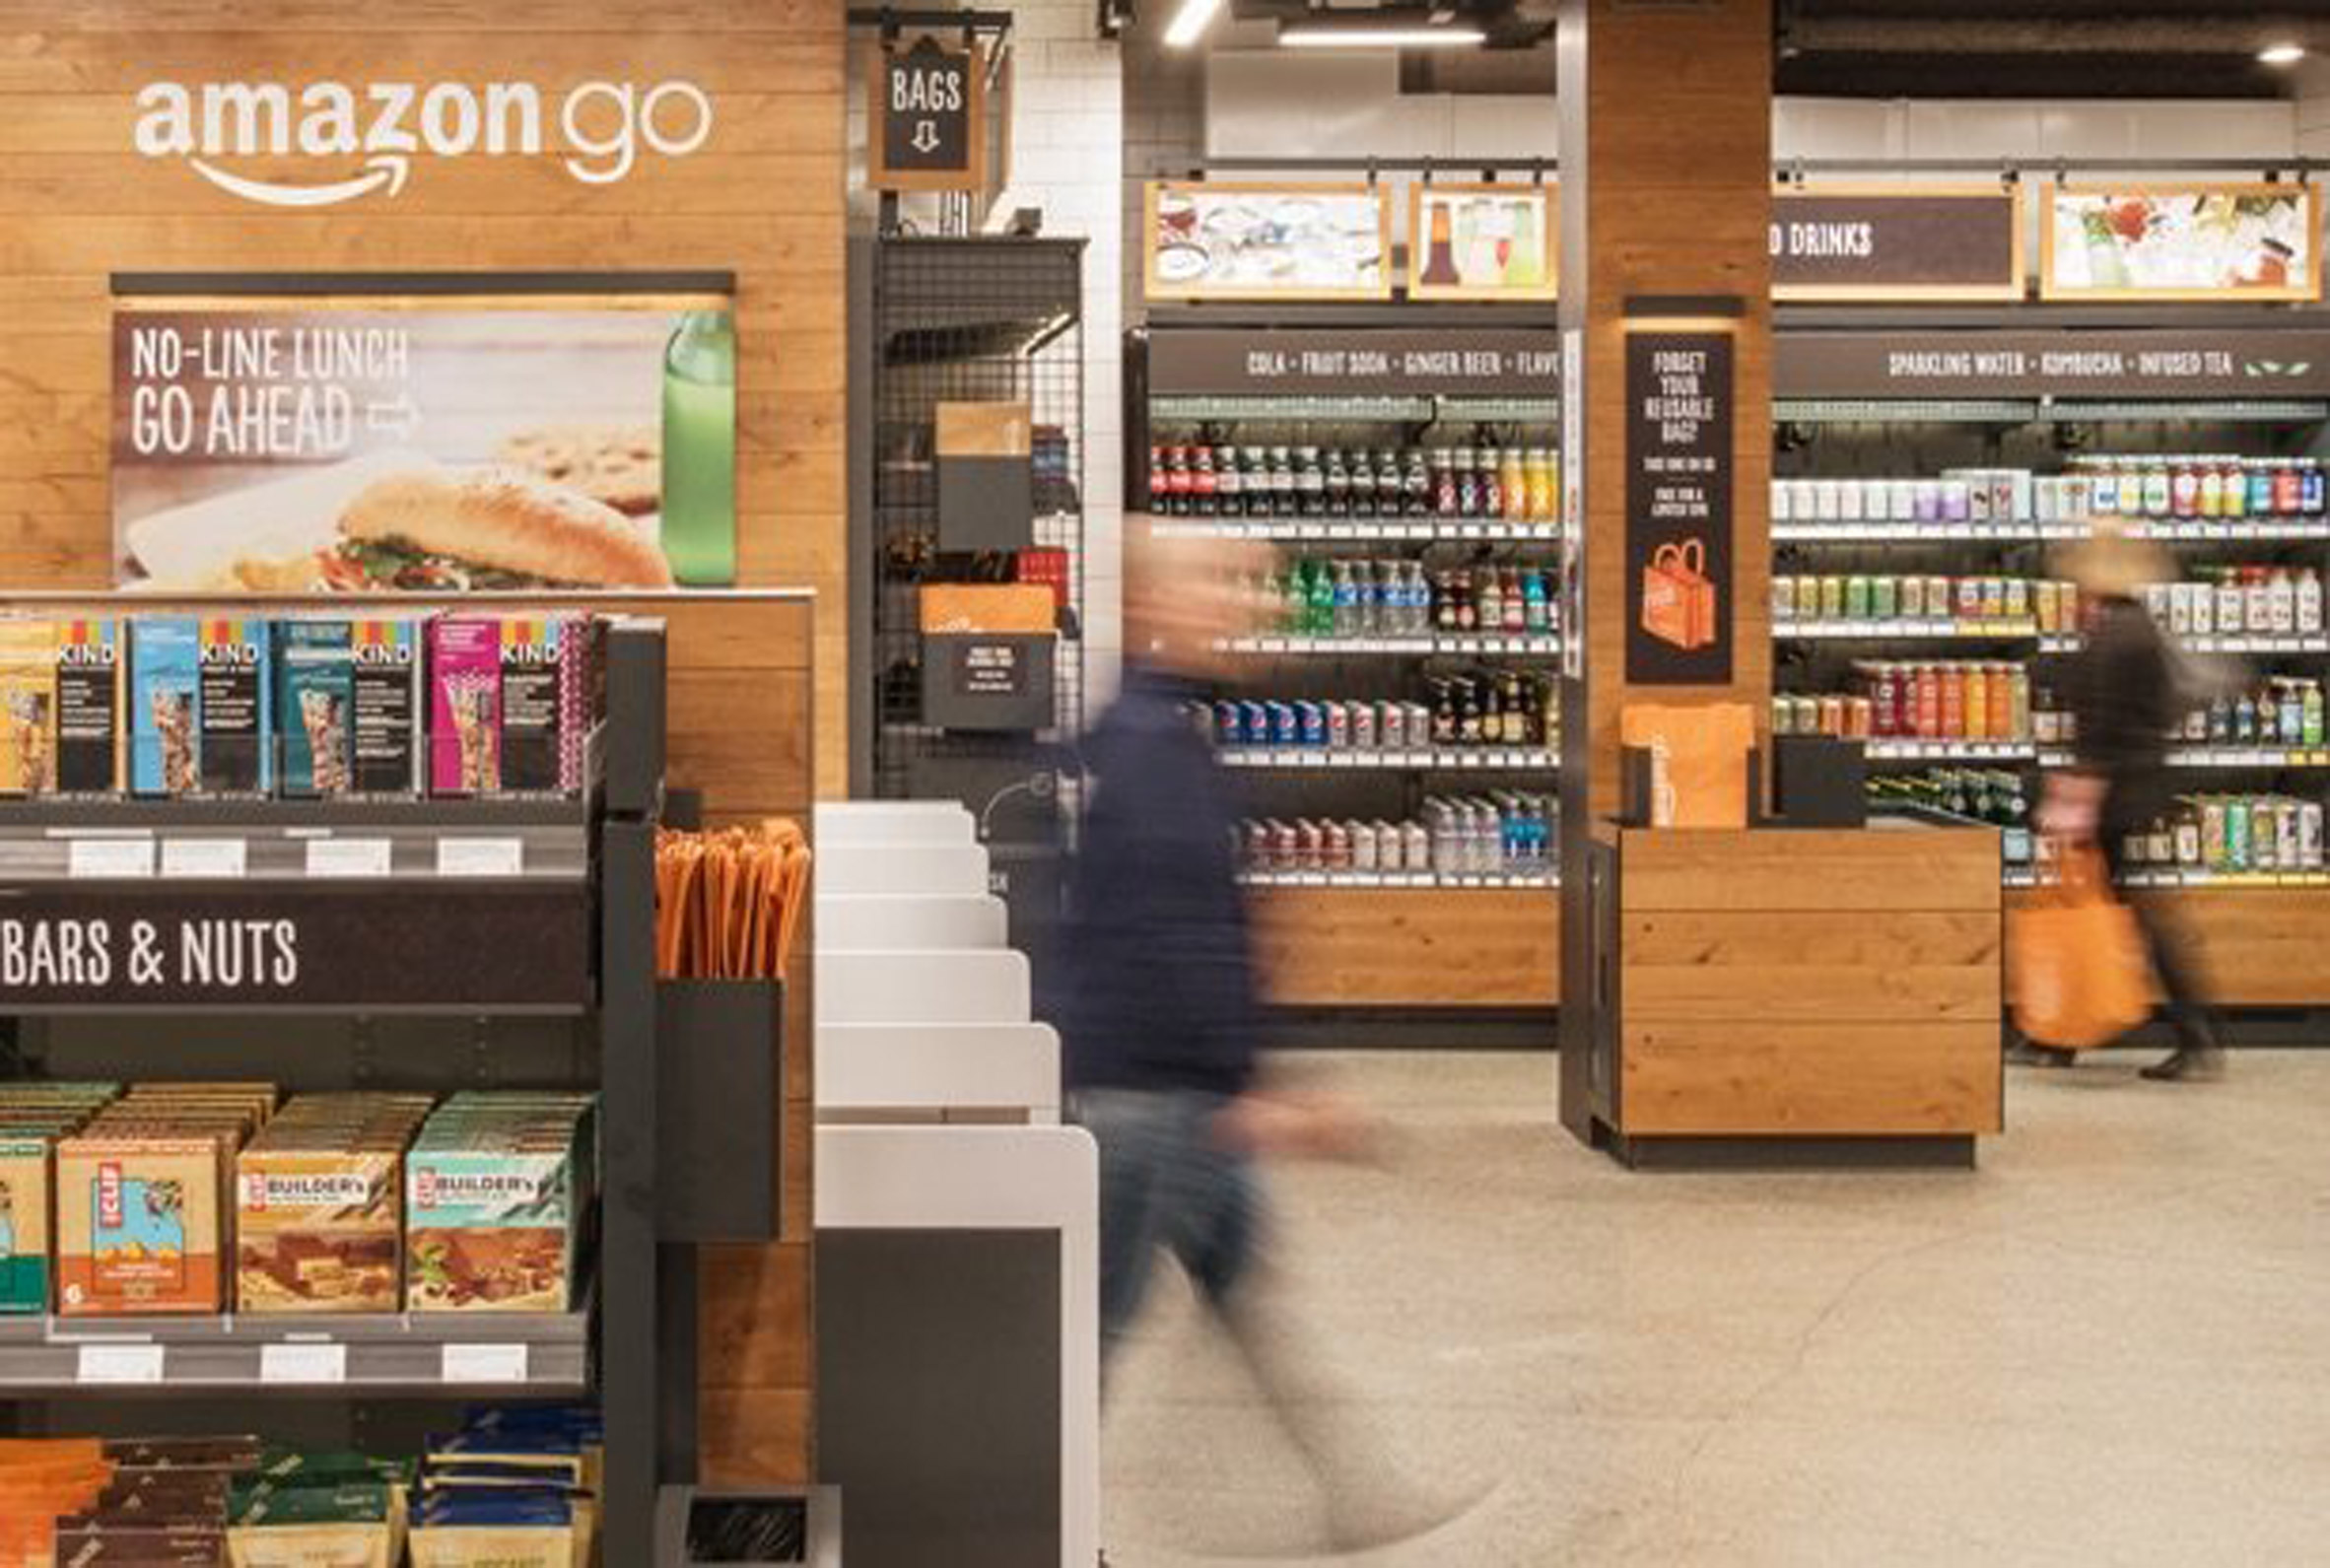 Amazon Go store swaps cashiers for sensors to remove queues